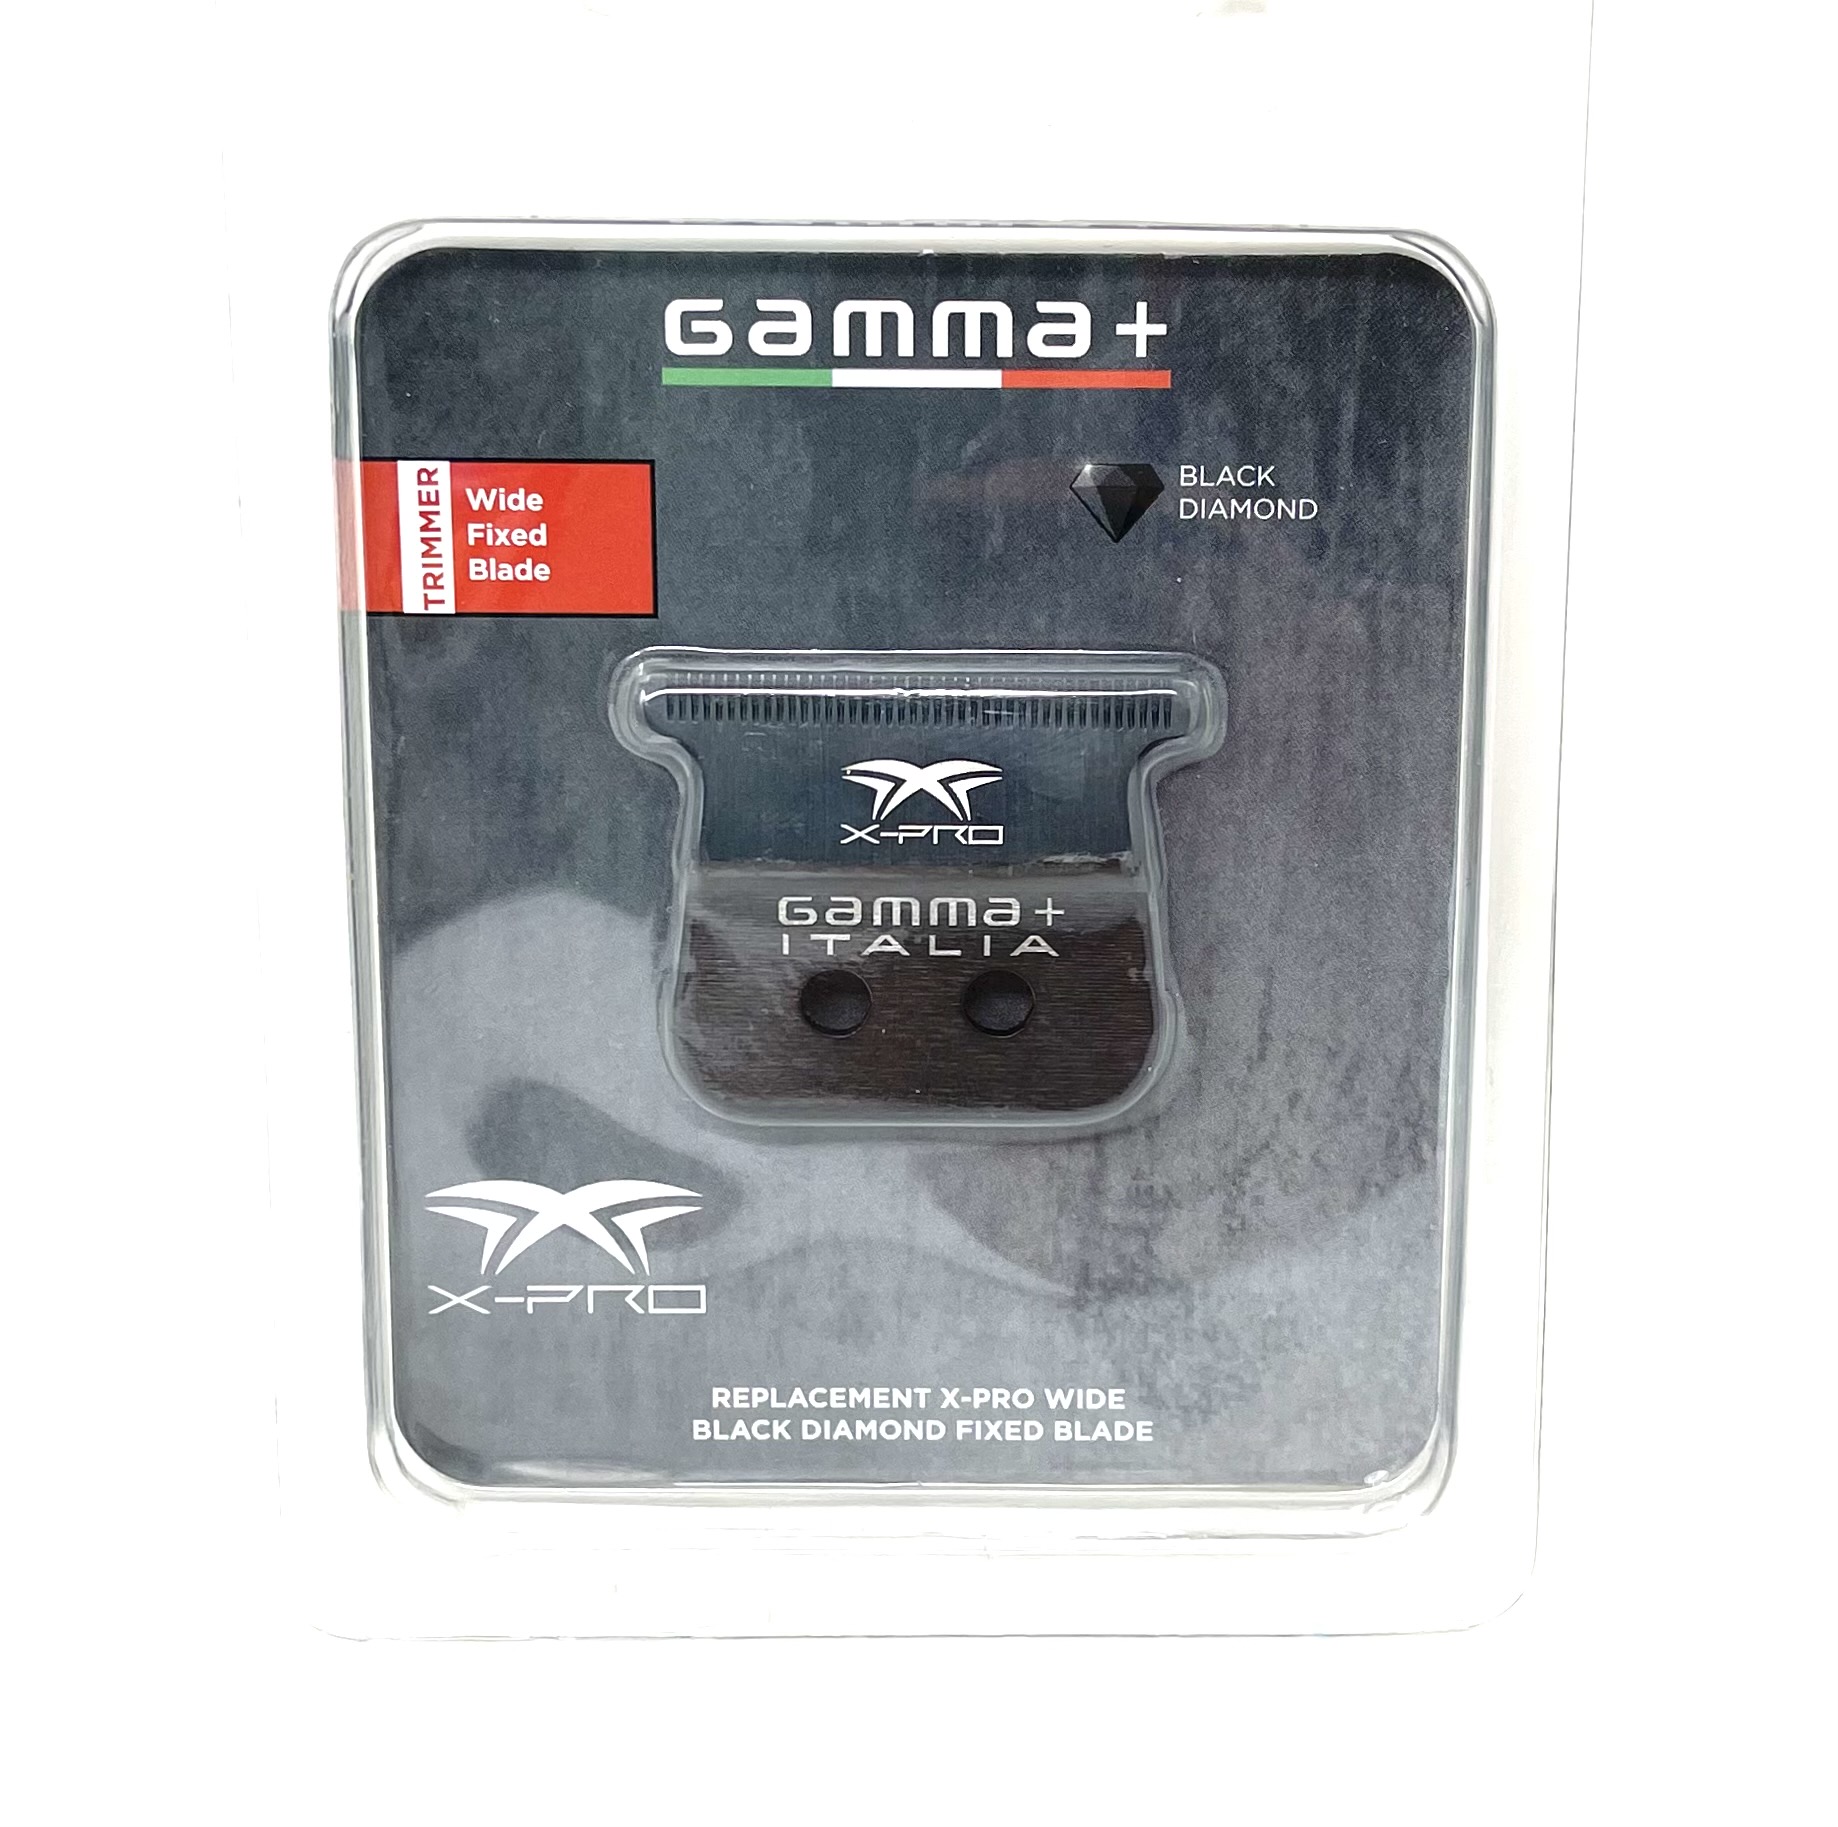 GAMMA+ X-PRO DLC REPLACEMENT FIXED TRIMMER BLADE - Wide Fixed .2MM